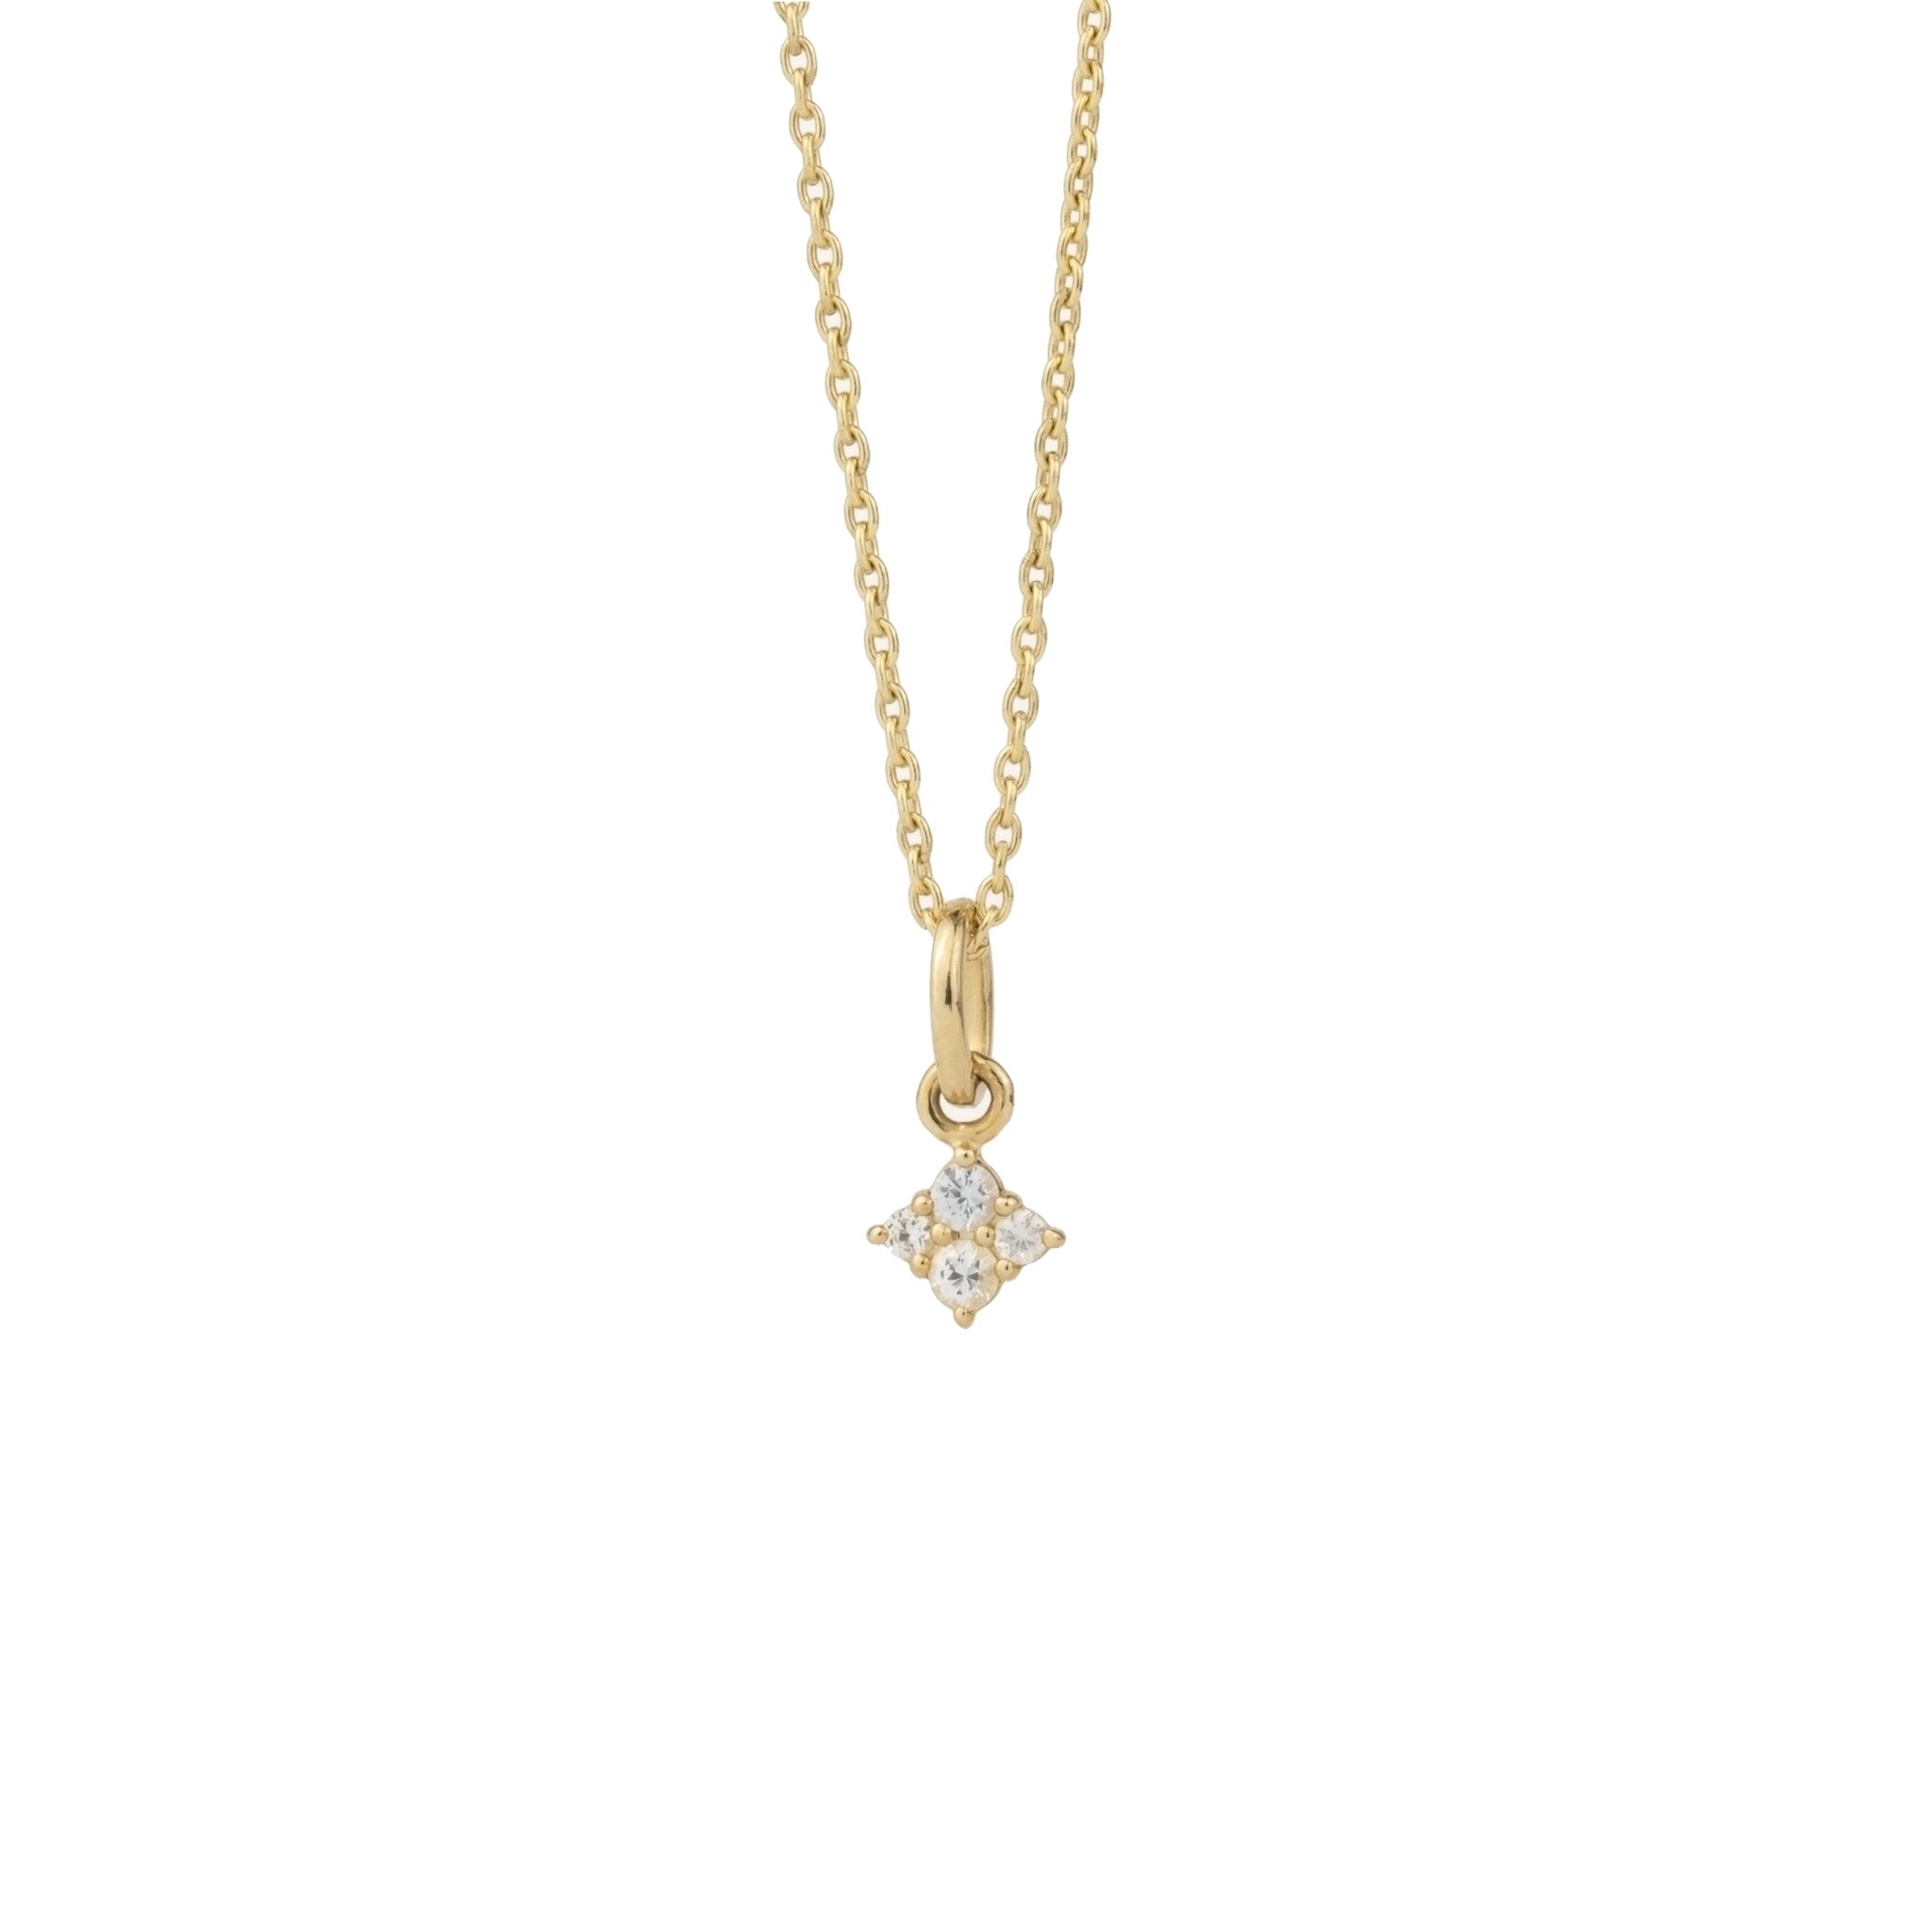 An Aiden Jae Stardust Charm Necklace on a gold chain.